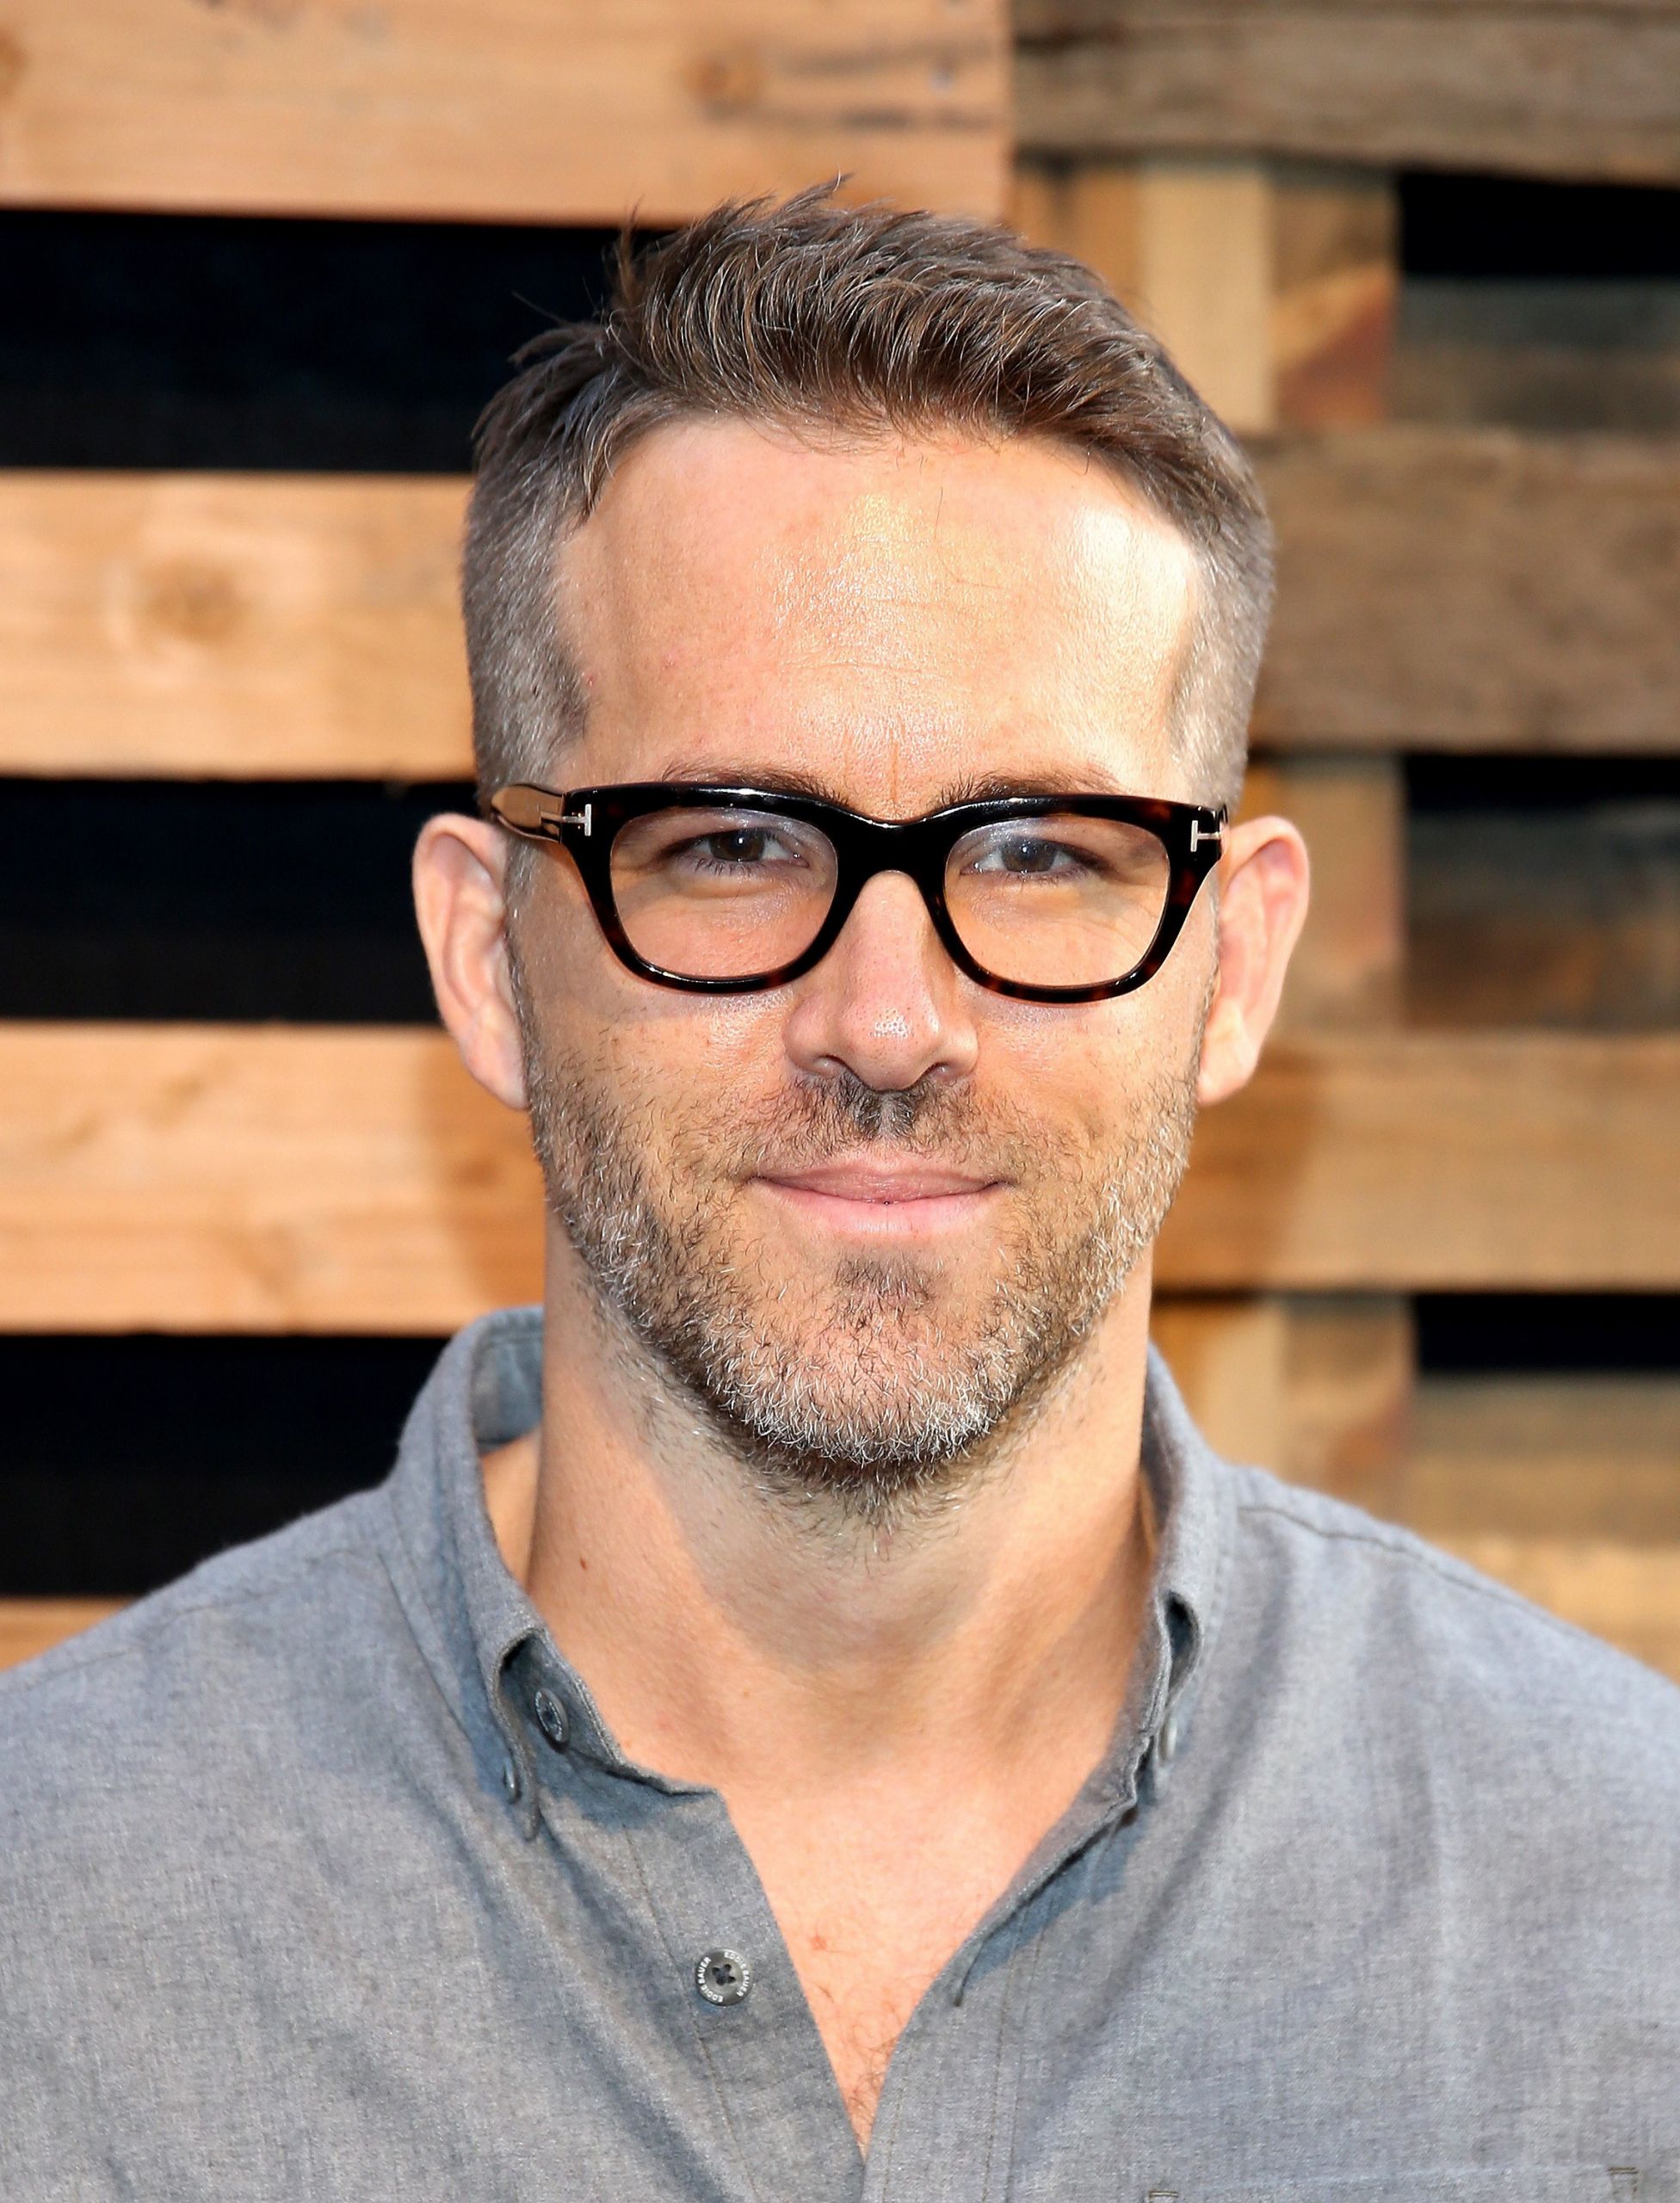 Mens Hairstyles With Glasses
 The 12 Most Popular Fall Haircuts According to Grooming